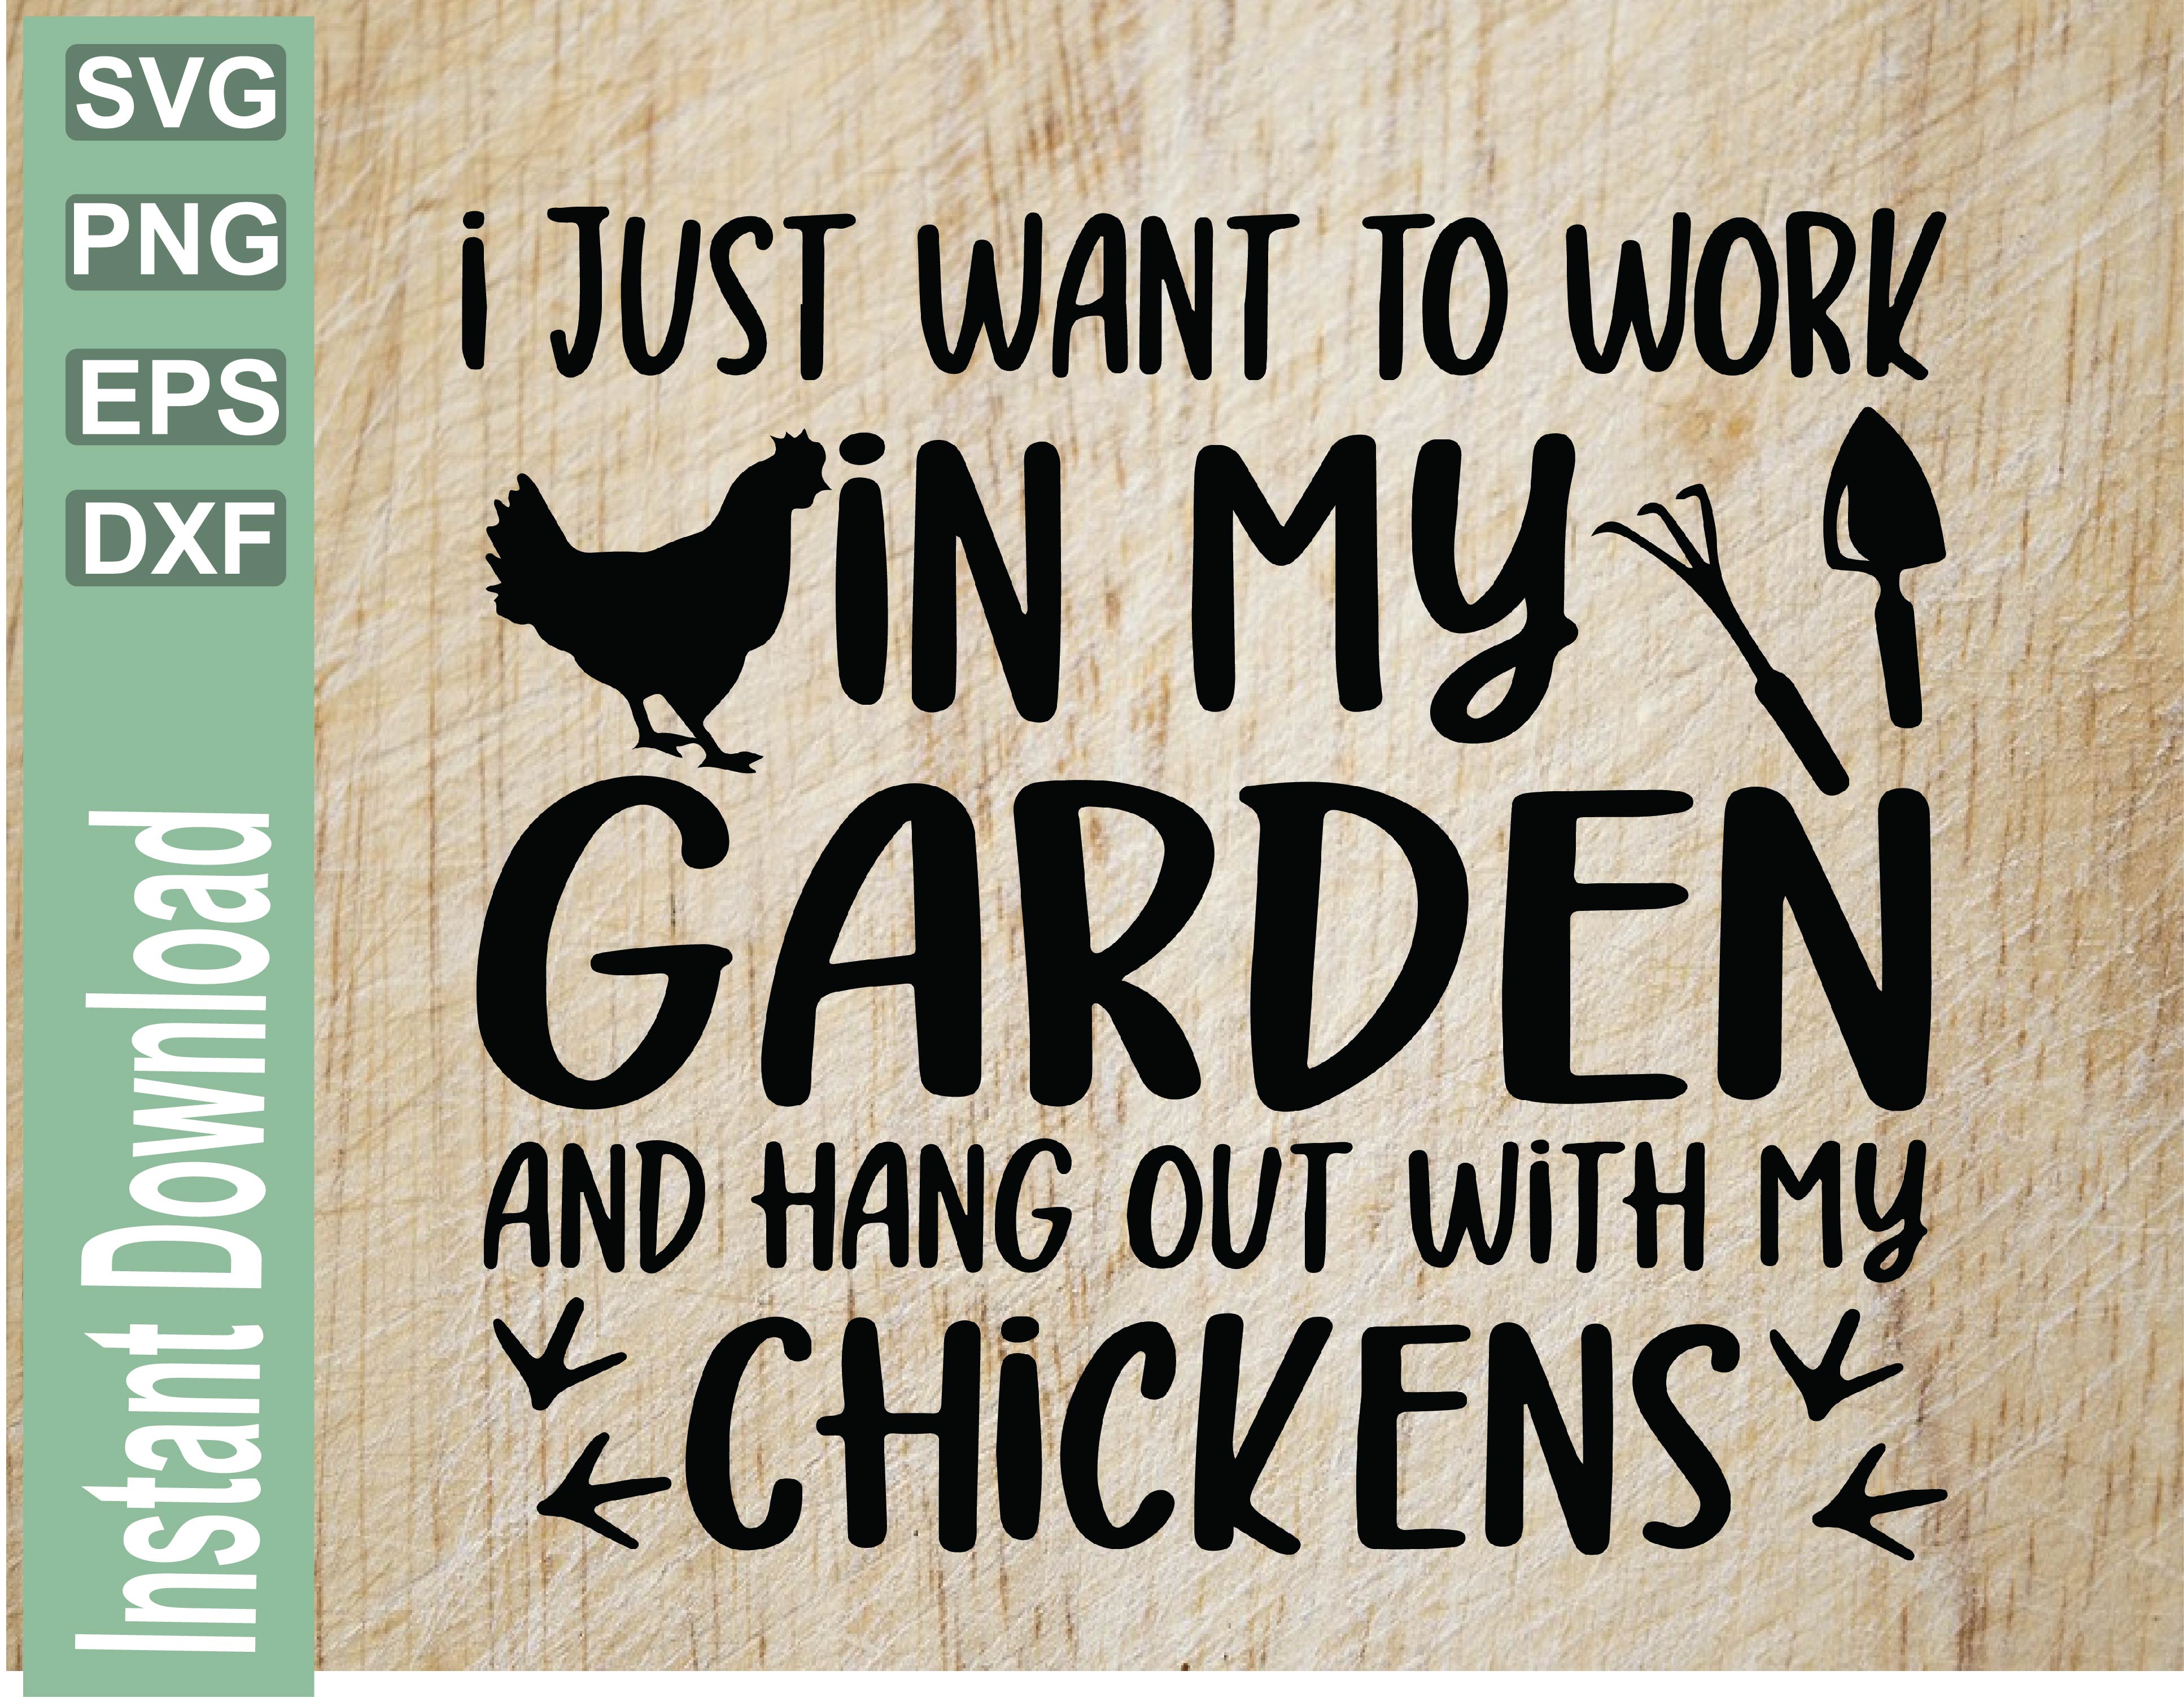 Download Chickens Png Chickens Svg Hangout With My Chickens Svg Cut File Of Chickens Designbtf Com